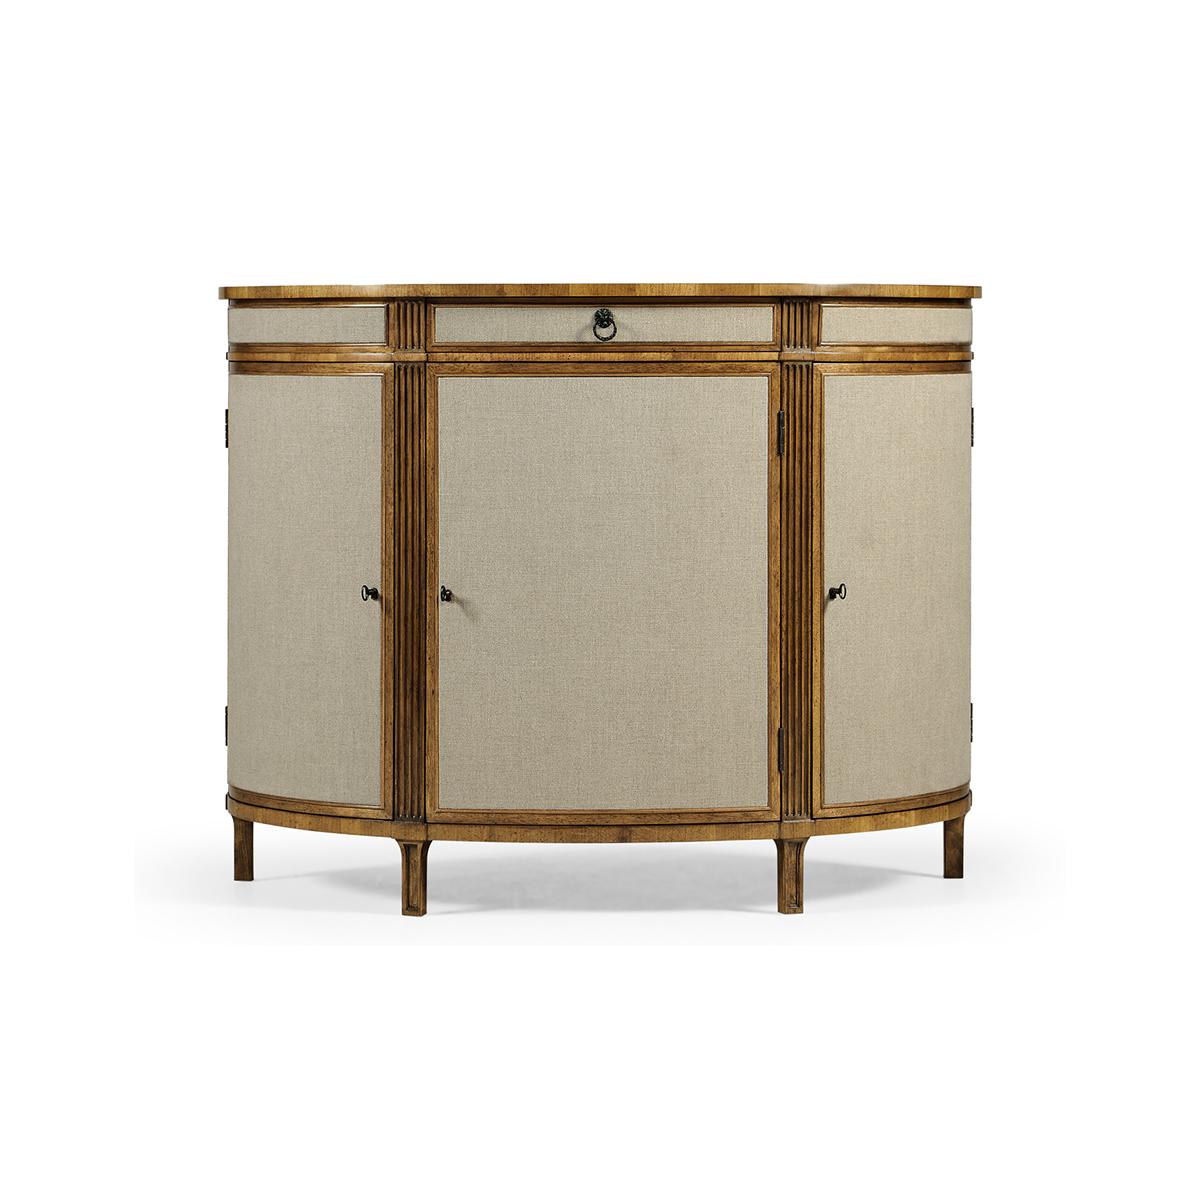 Georgian Modern Demi Lune Cabinet – a sophisticated fusion of classic and contemporary design. Expertly crafted, this cabinet boasts a solid case with Kravet linen fabric cabinet doors and understated hardware. The grey fruitwood top, which sits